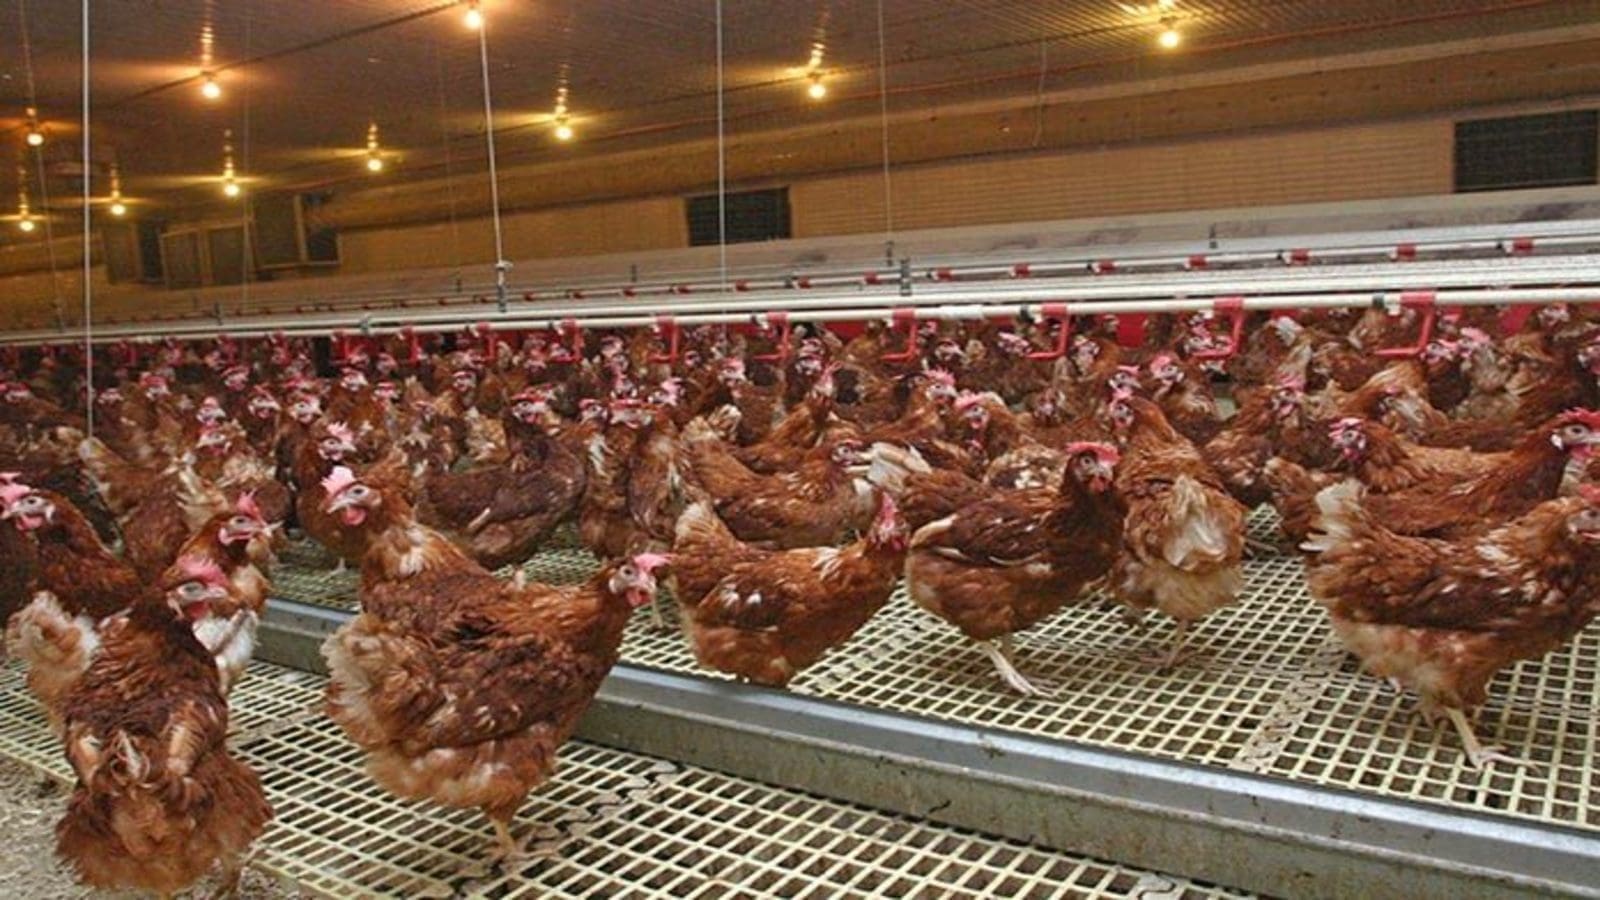 Poultry dealers, consumer groups seek for modernization of poultry regulations